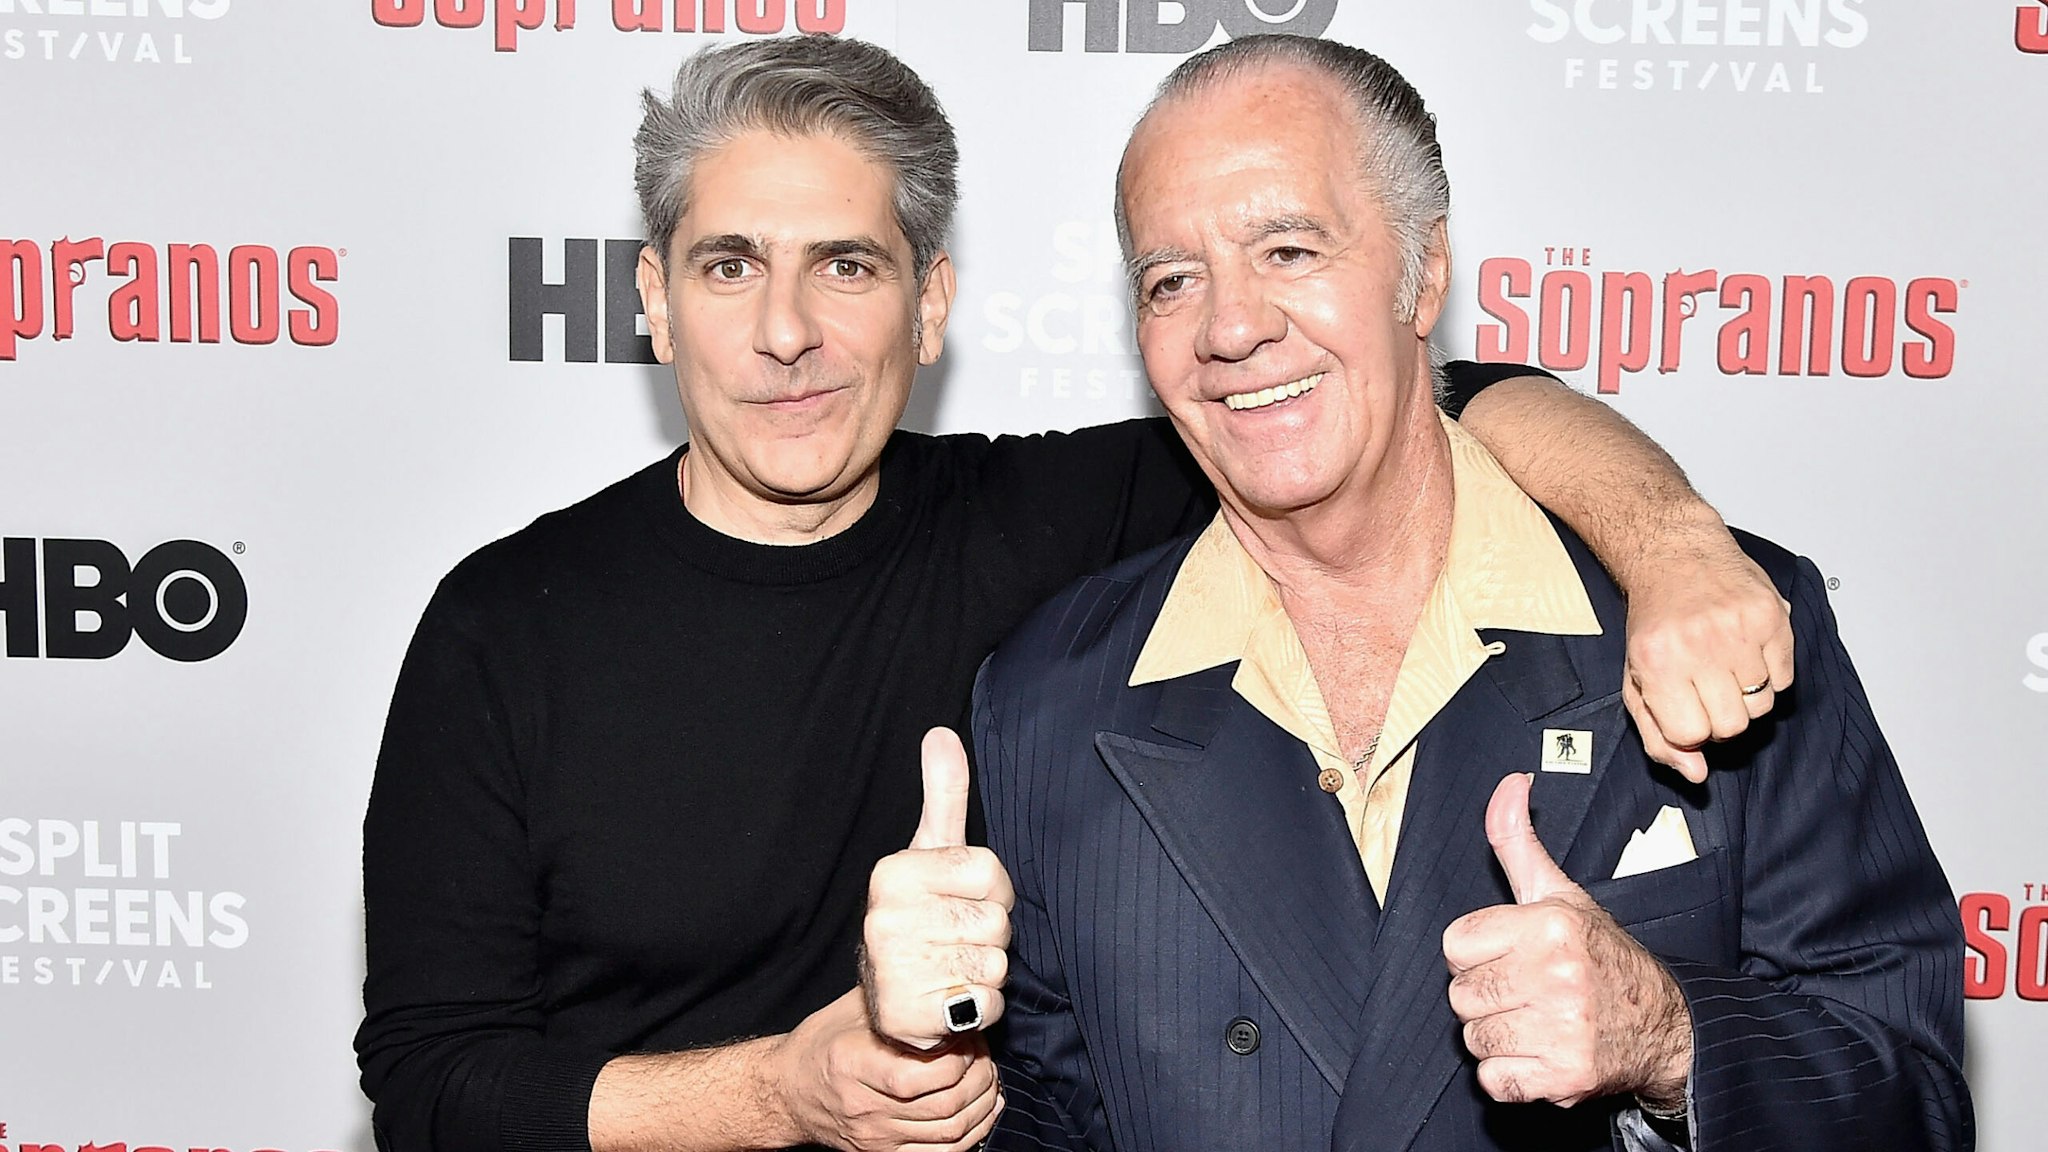 NEW YORK, NEW YORK - JANUARY 09: Michael Imperioli and Tony Sirico attend the "The Sopranos" 20th Anniversary Panel Discussion at SVA Theater on January 09, 2019 in New York City.